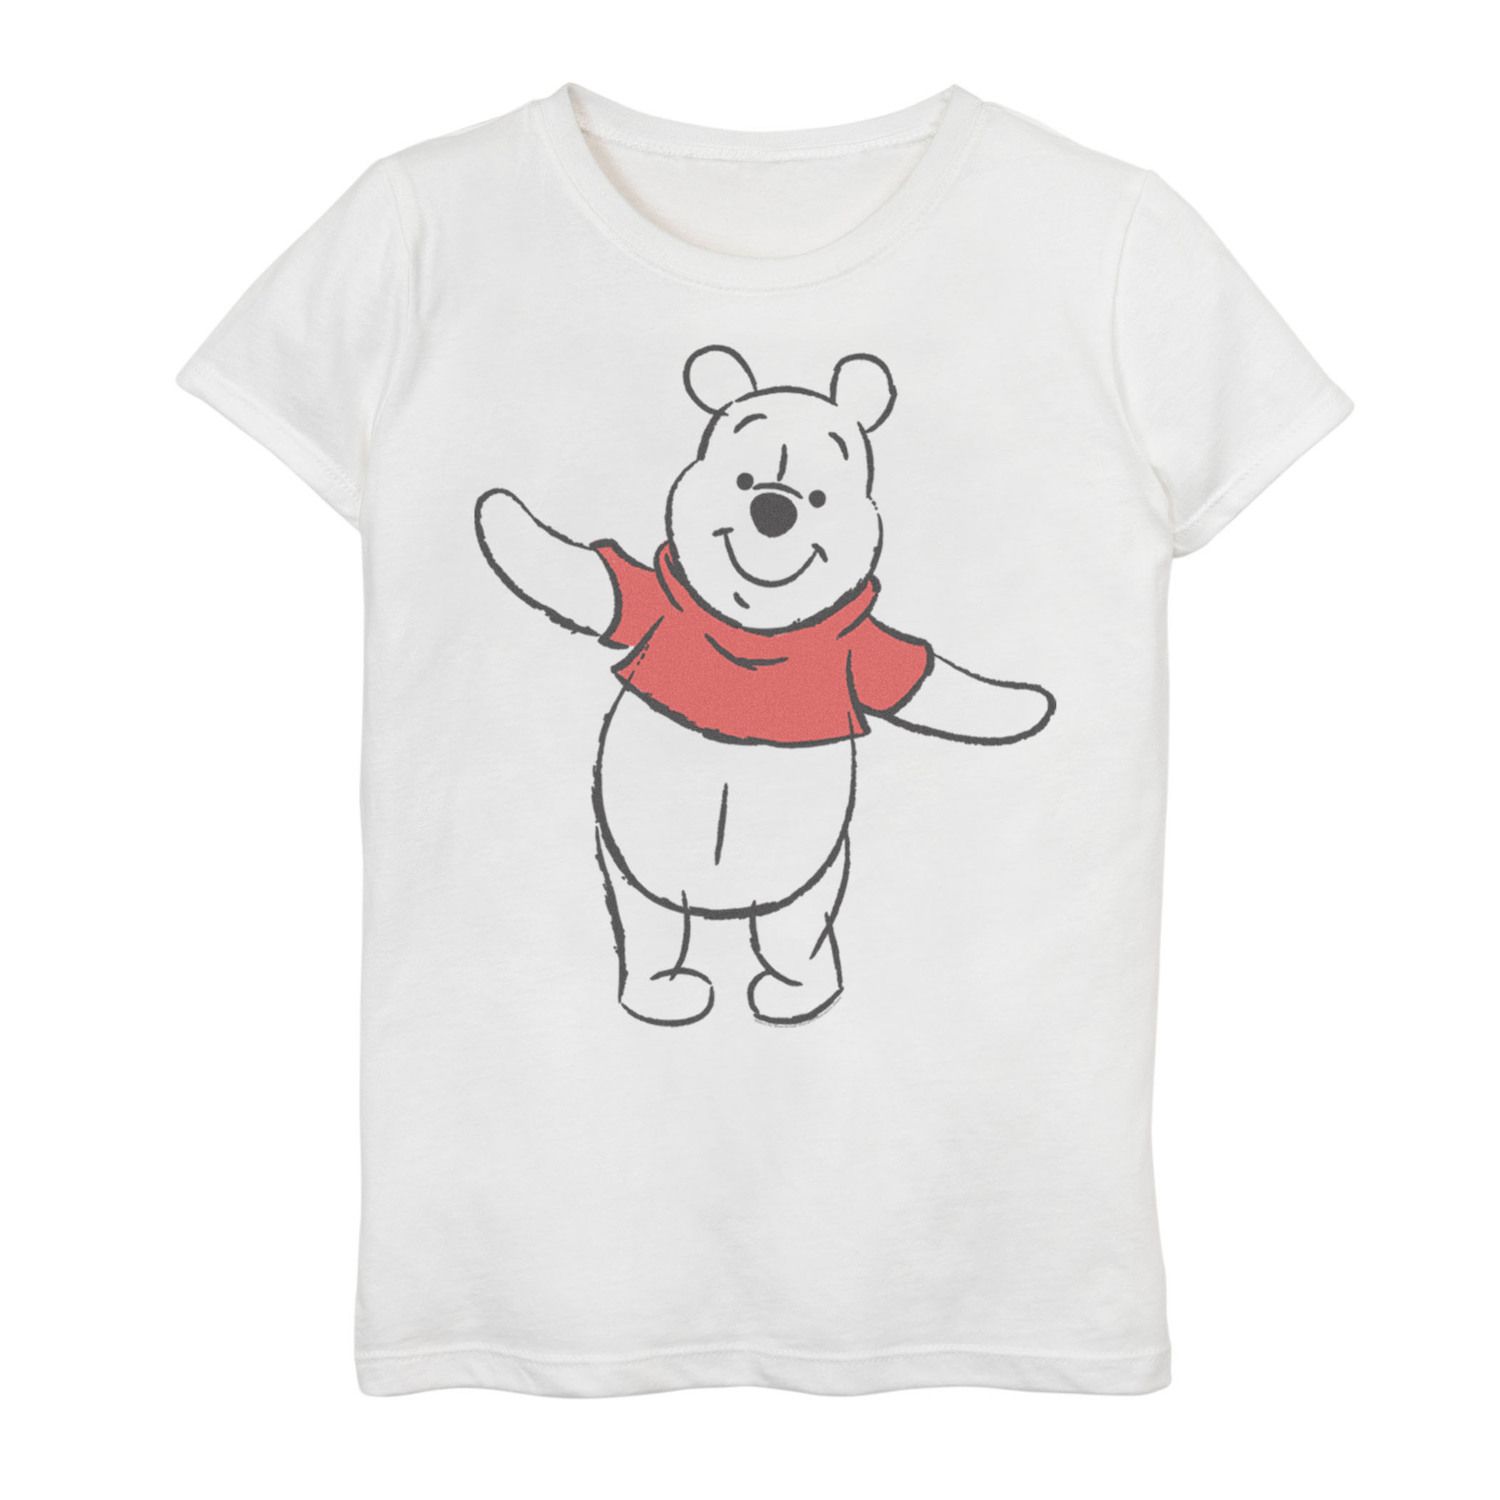 Image for Disney 's Winnie The Pooh Girls 7-16 Art Bear Sketch Graphic Tee at Kohl's.